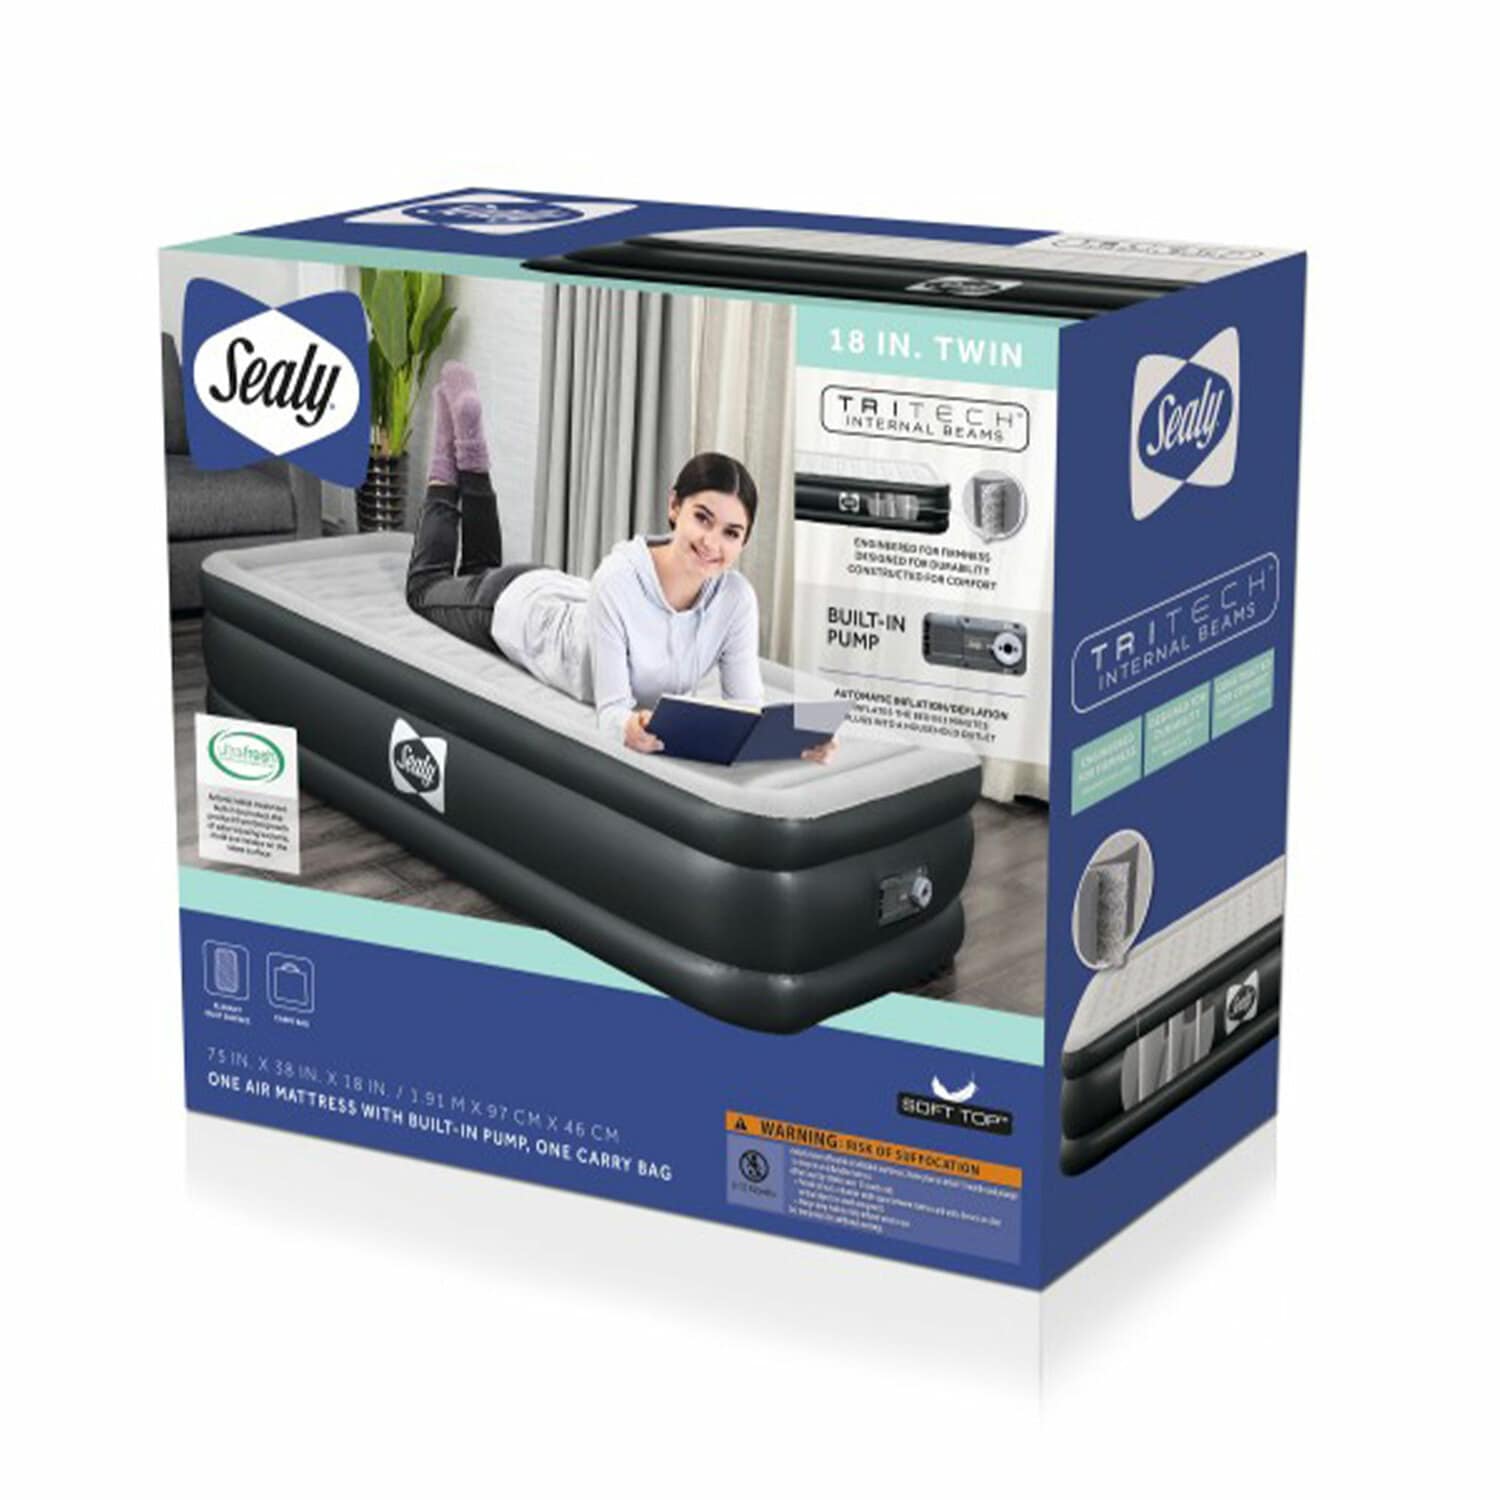 Sealy Twin Size Double High Air Mattress with Internal Pump, Gray